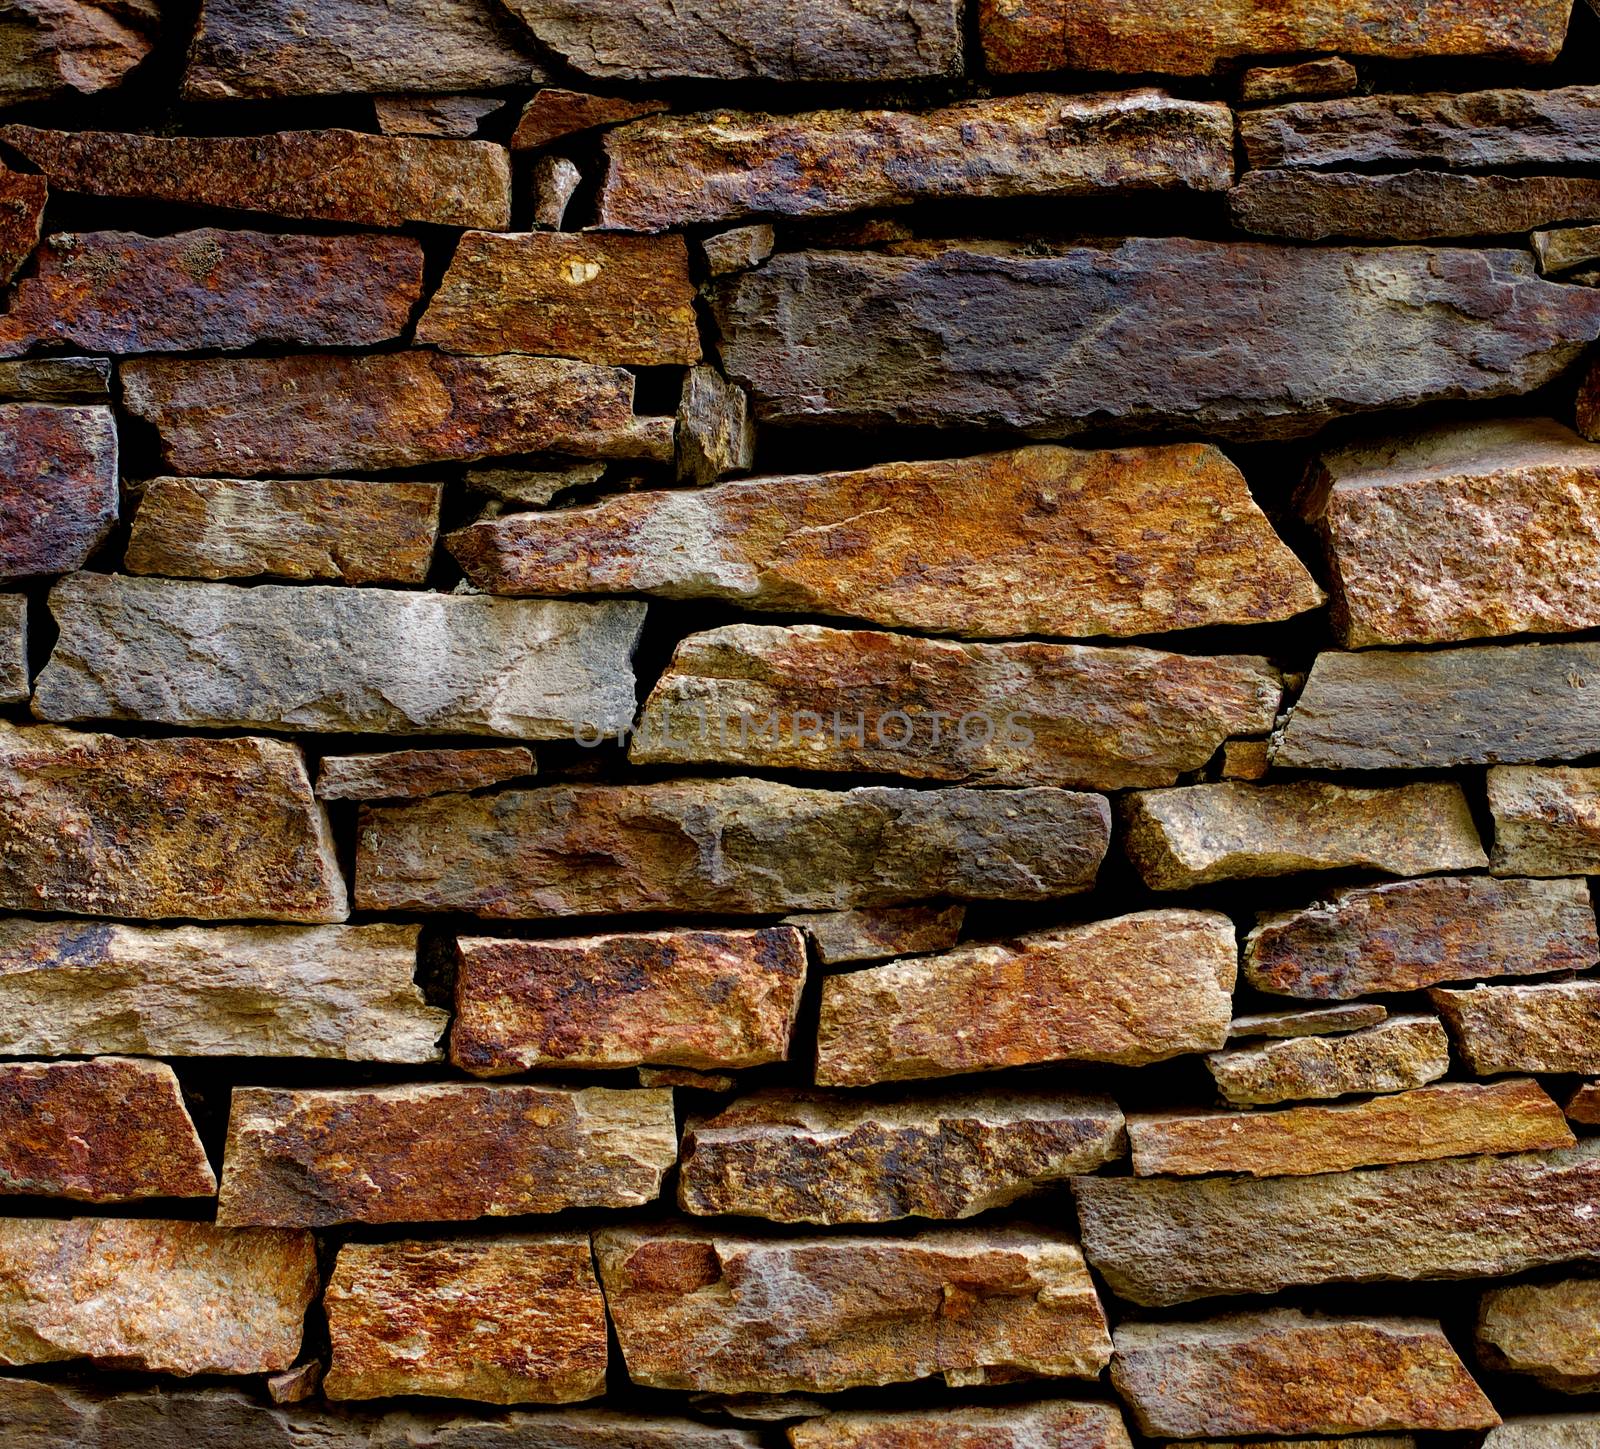 Multi-Colored Old Stone Plank Background closeup Outdoors